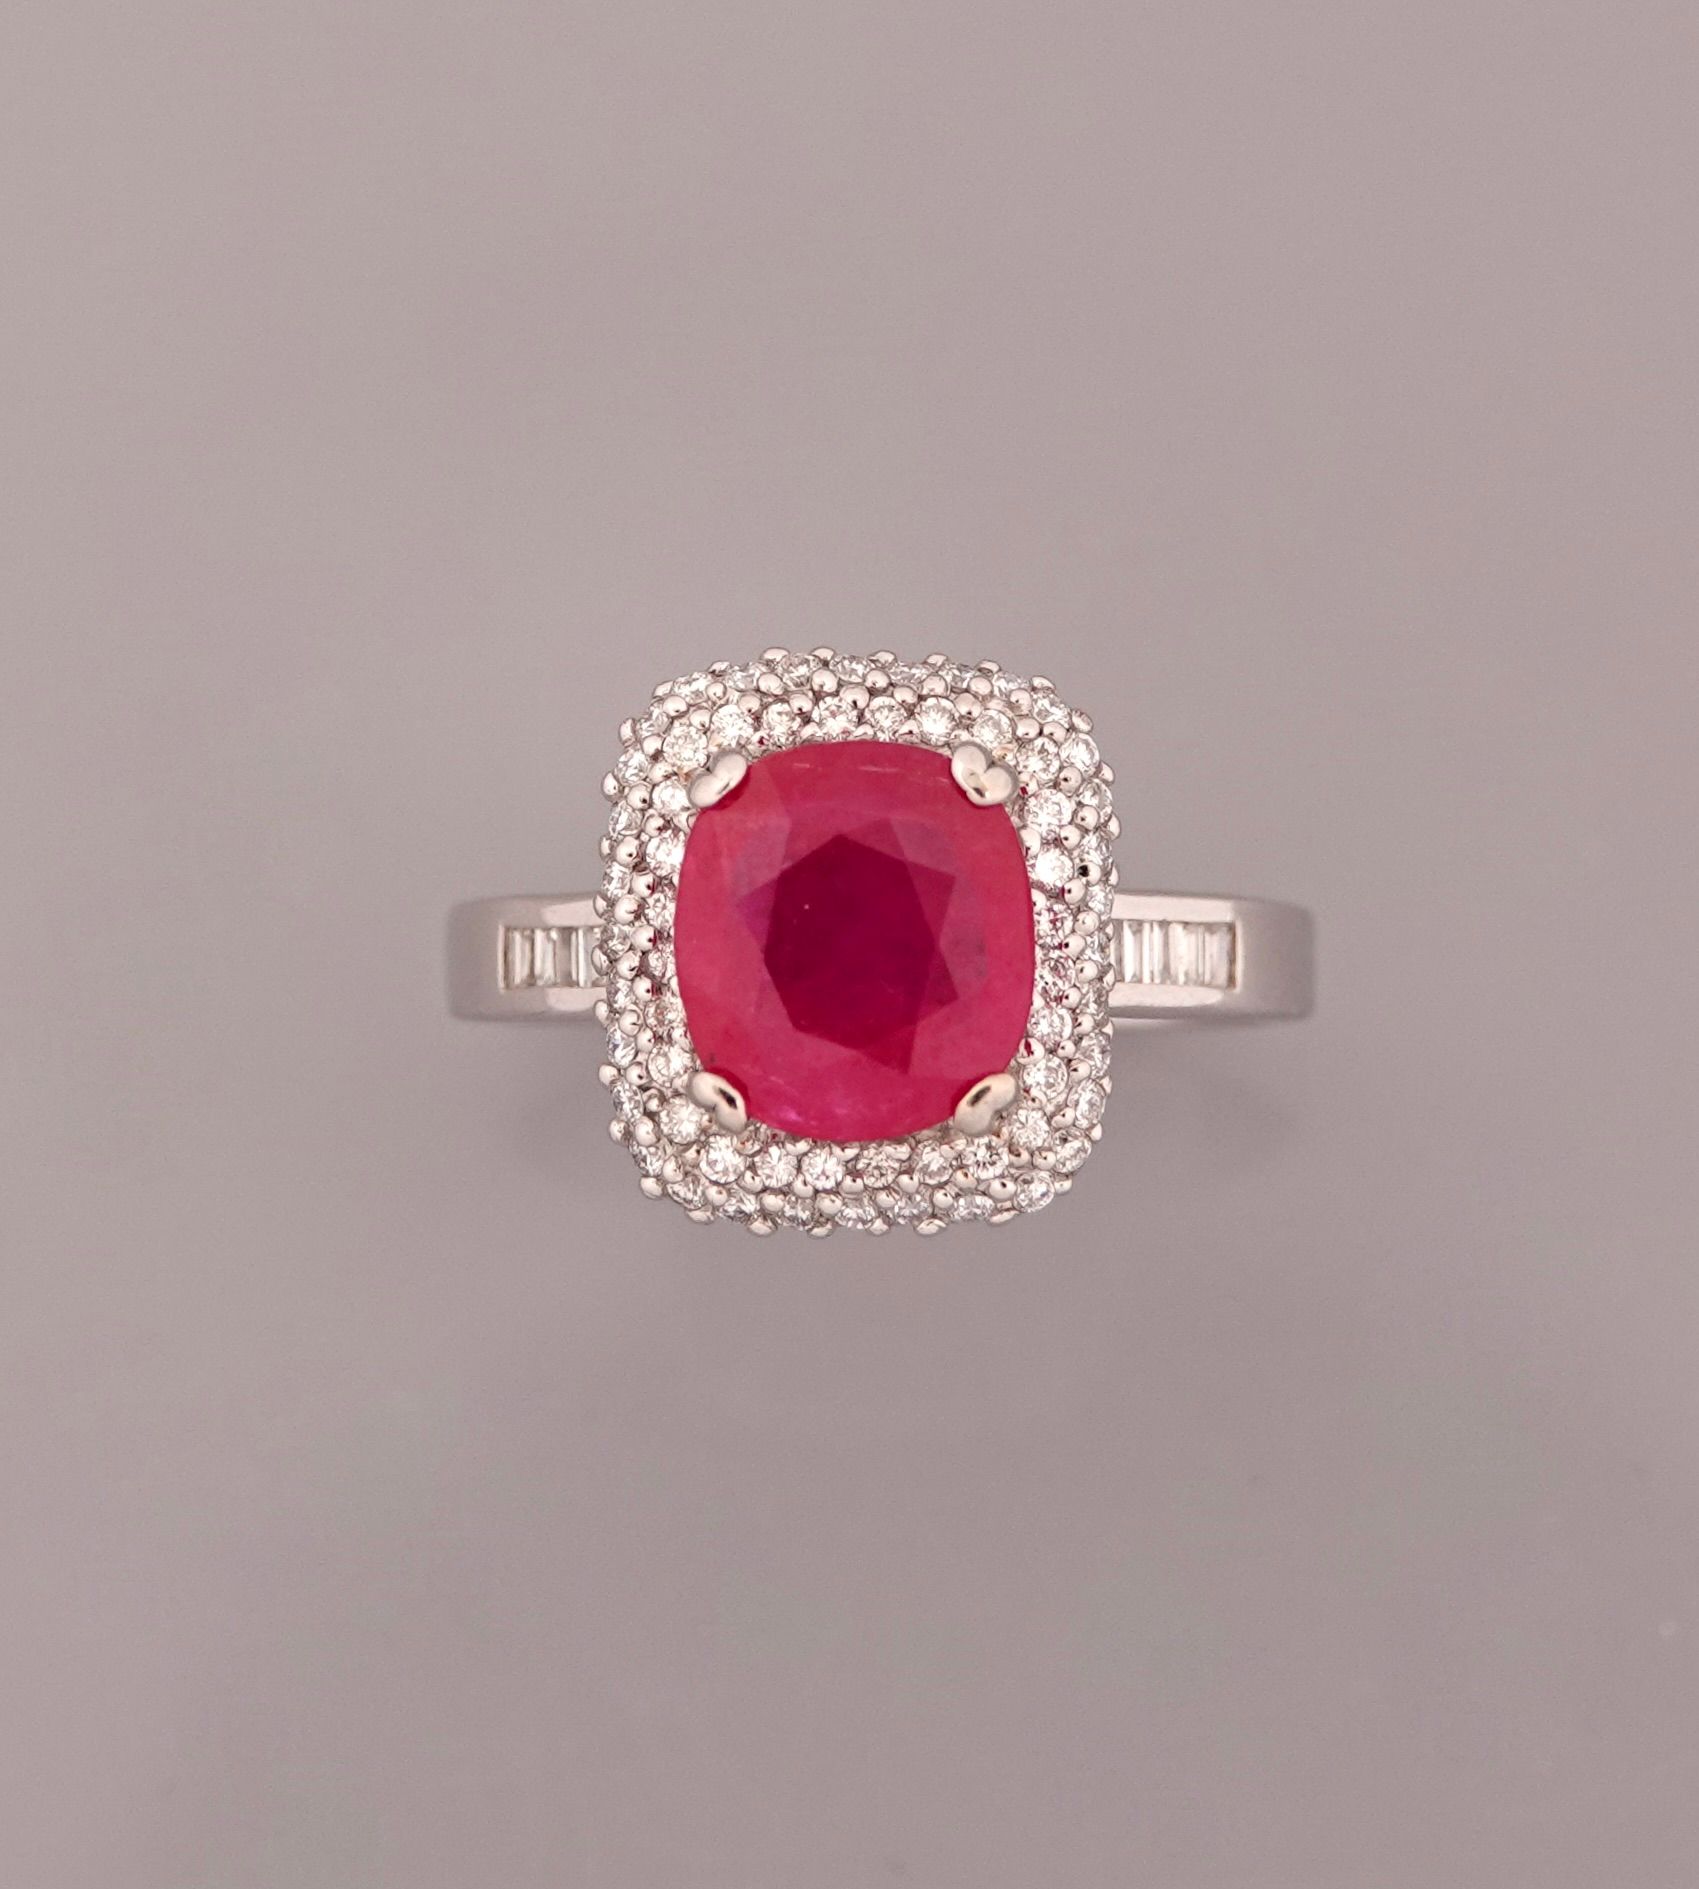 Null Ring in white gold, 750 MM, set with an oval ruby weighing 2.37 carats surr&hellip;